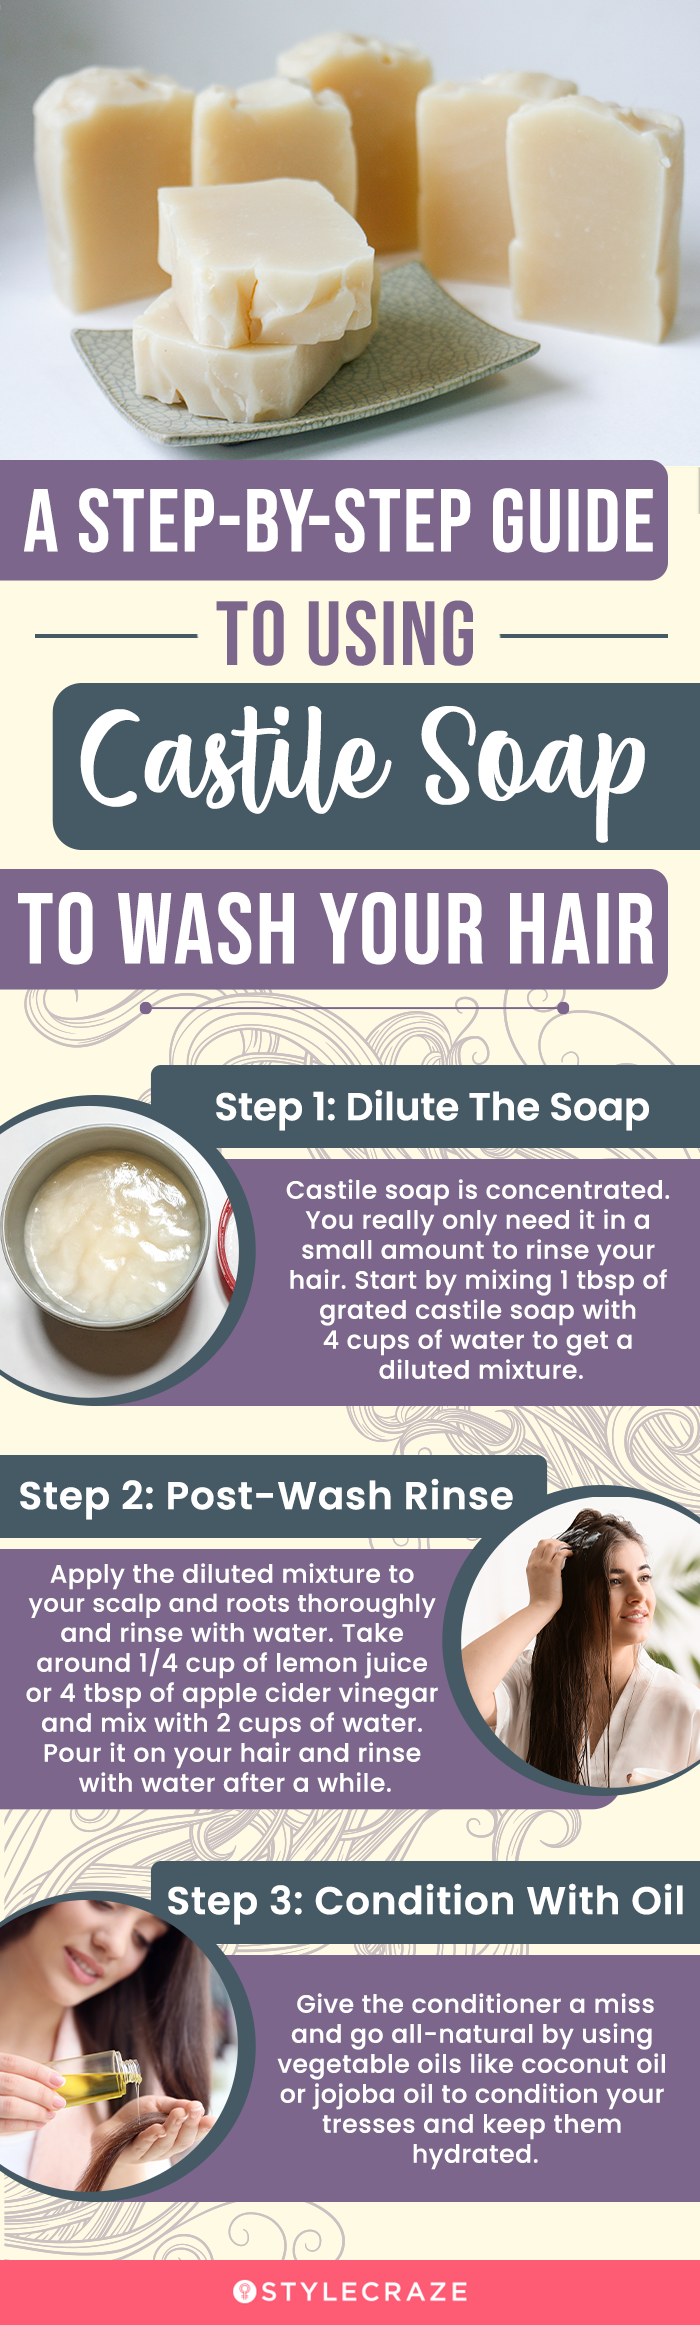 a step by step guide to using castile soap to wash your hair [infographic]